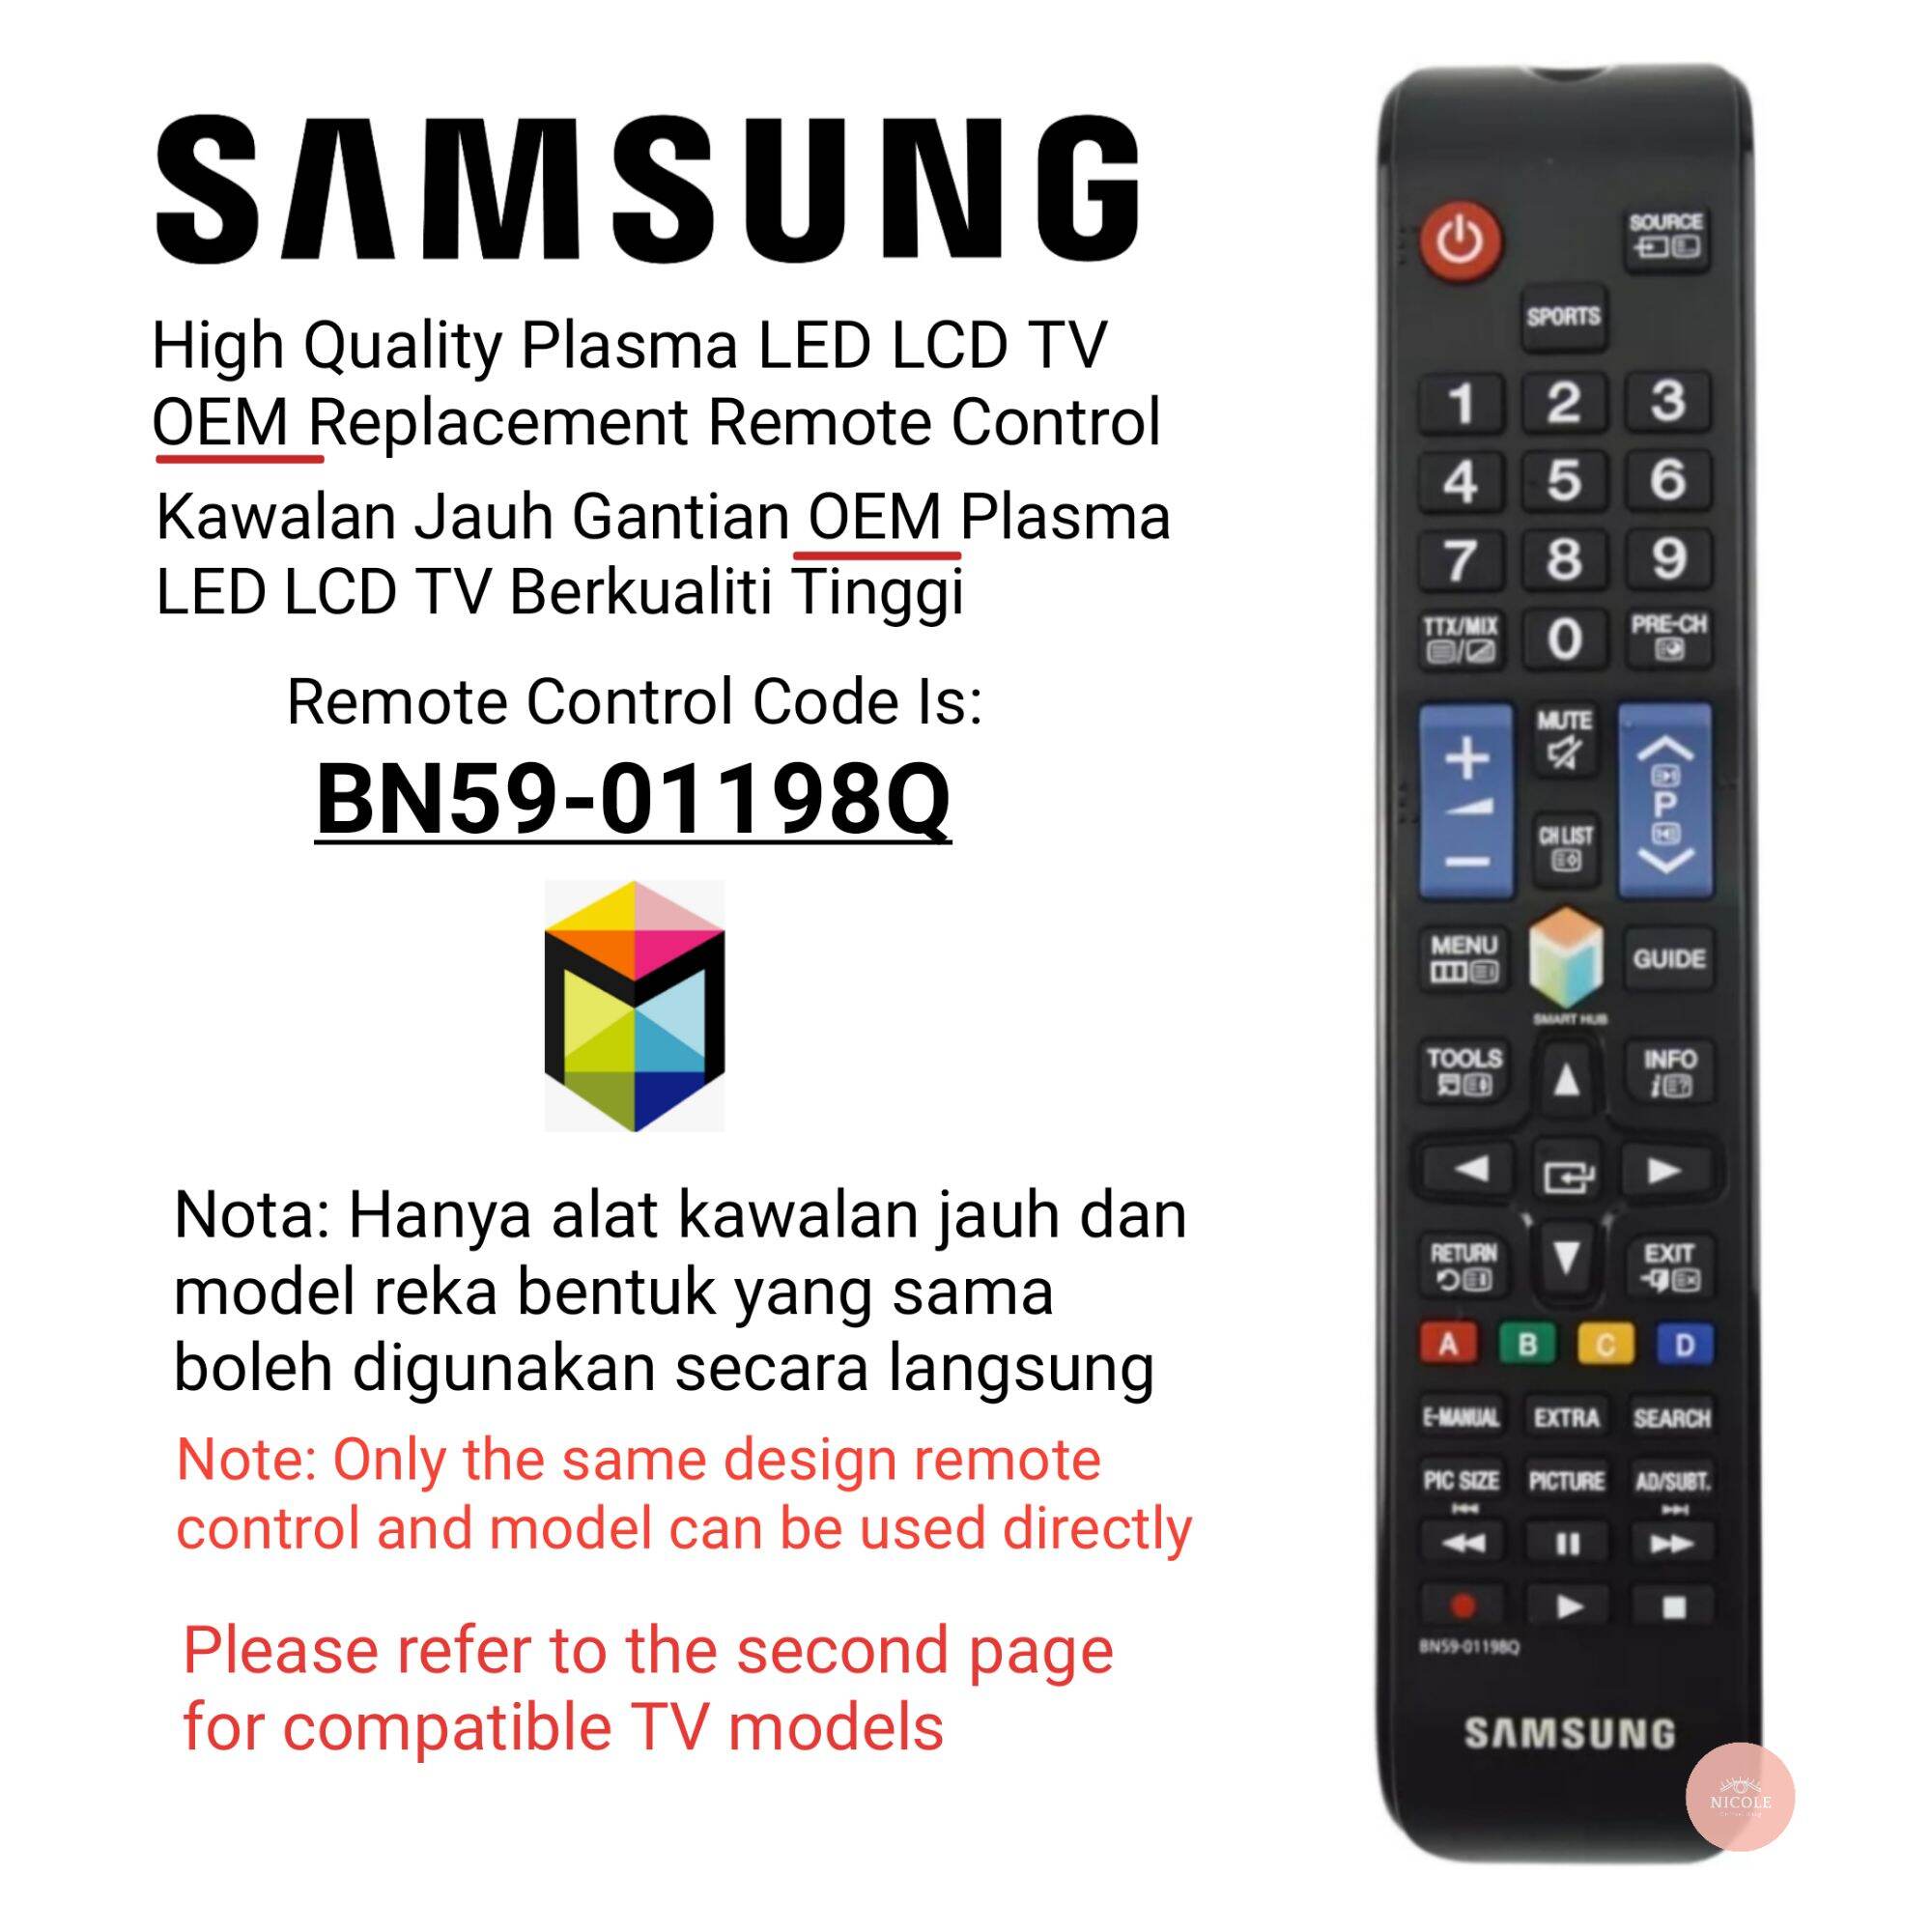  AA59-00543A Replace Remote Control Compatible with Samsung LED  LCD Plasma 3D TV UE40D8000YU PS51D8000FU UE55D7000LU UE55D8000YU  UE46D7000LU UE60D8000YU UE40D7000LU UE46D8000YU PS64D8000fu PS51D8080FS :  Electronics